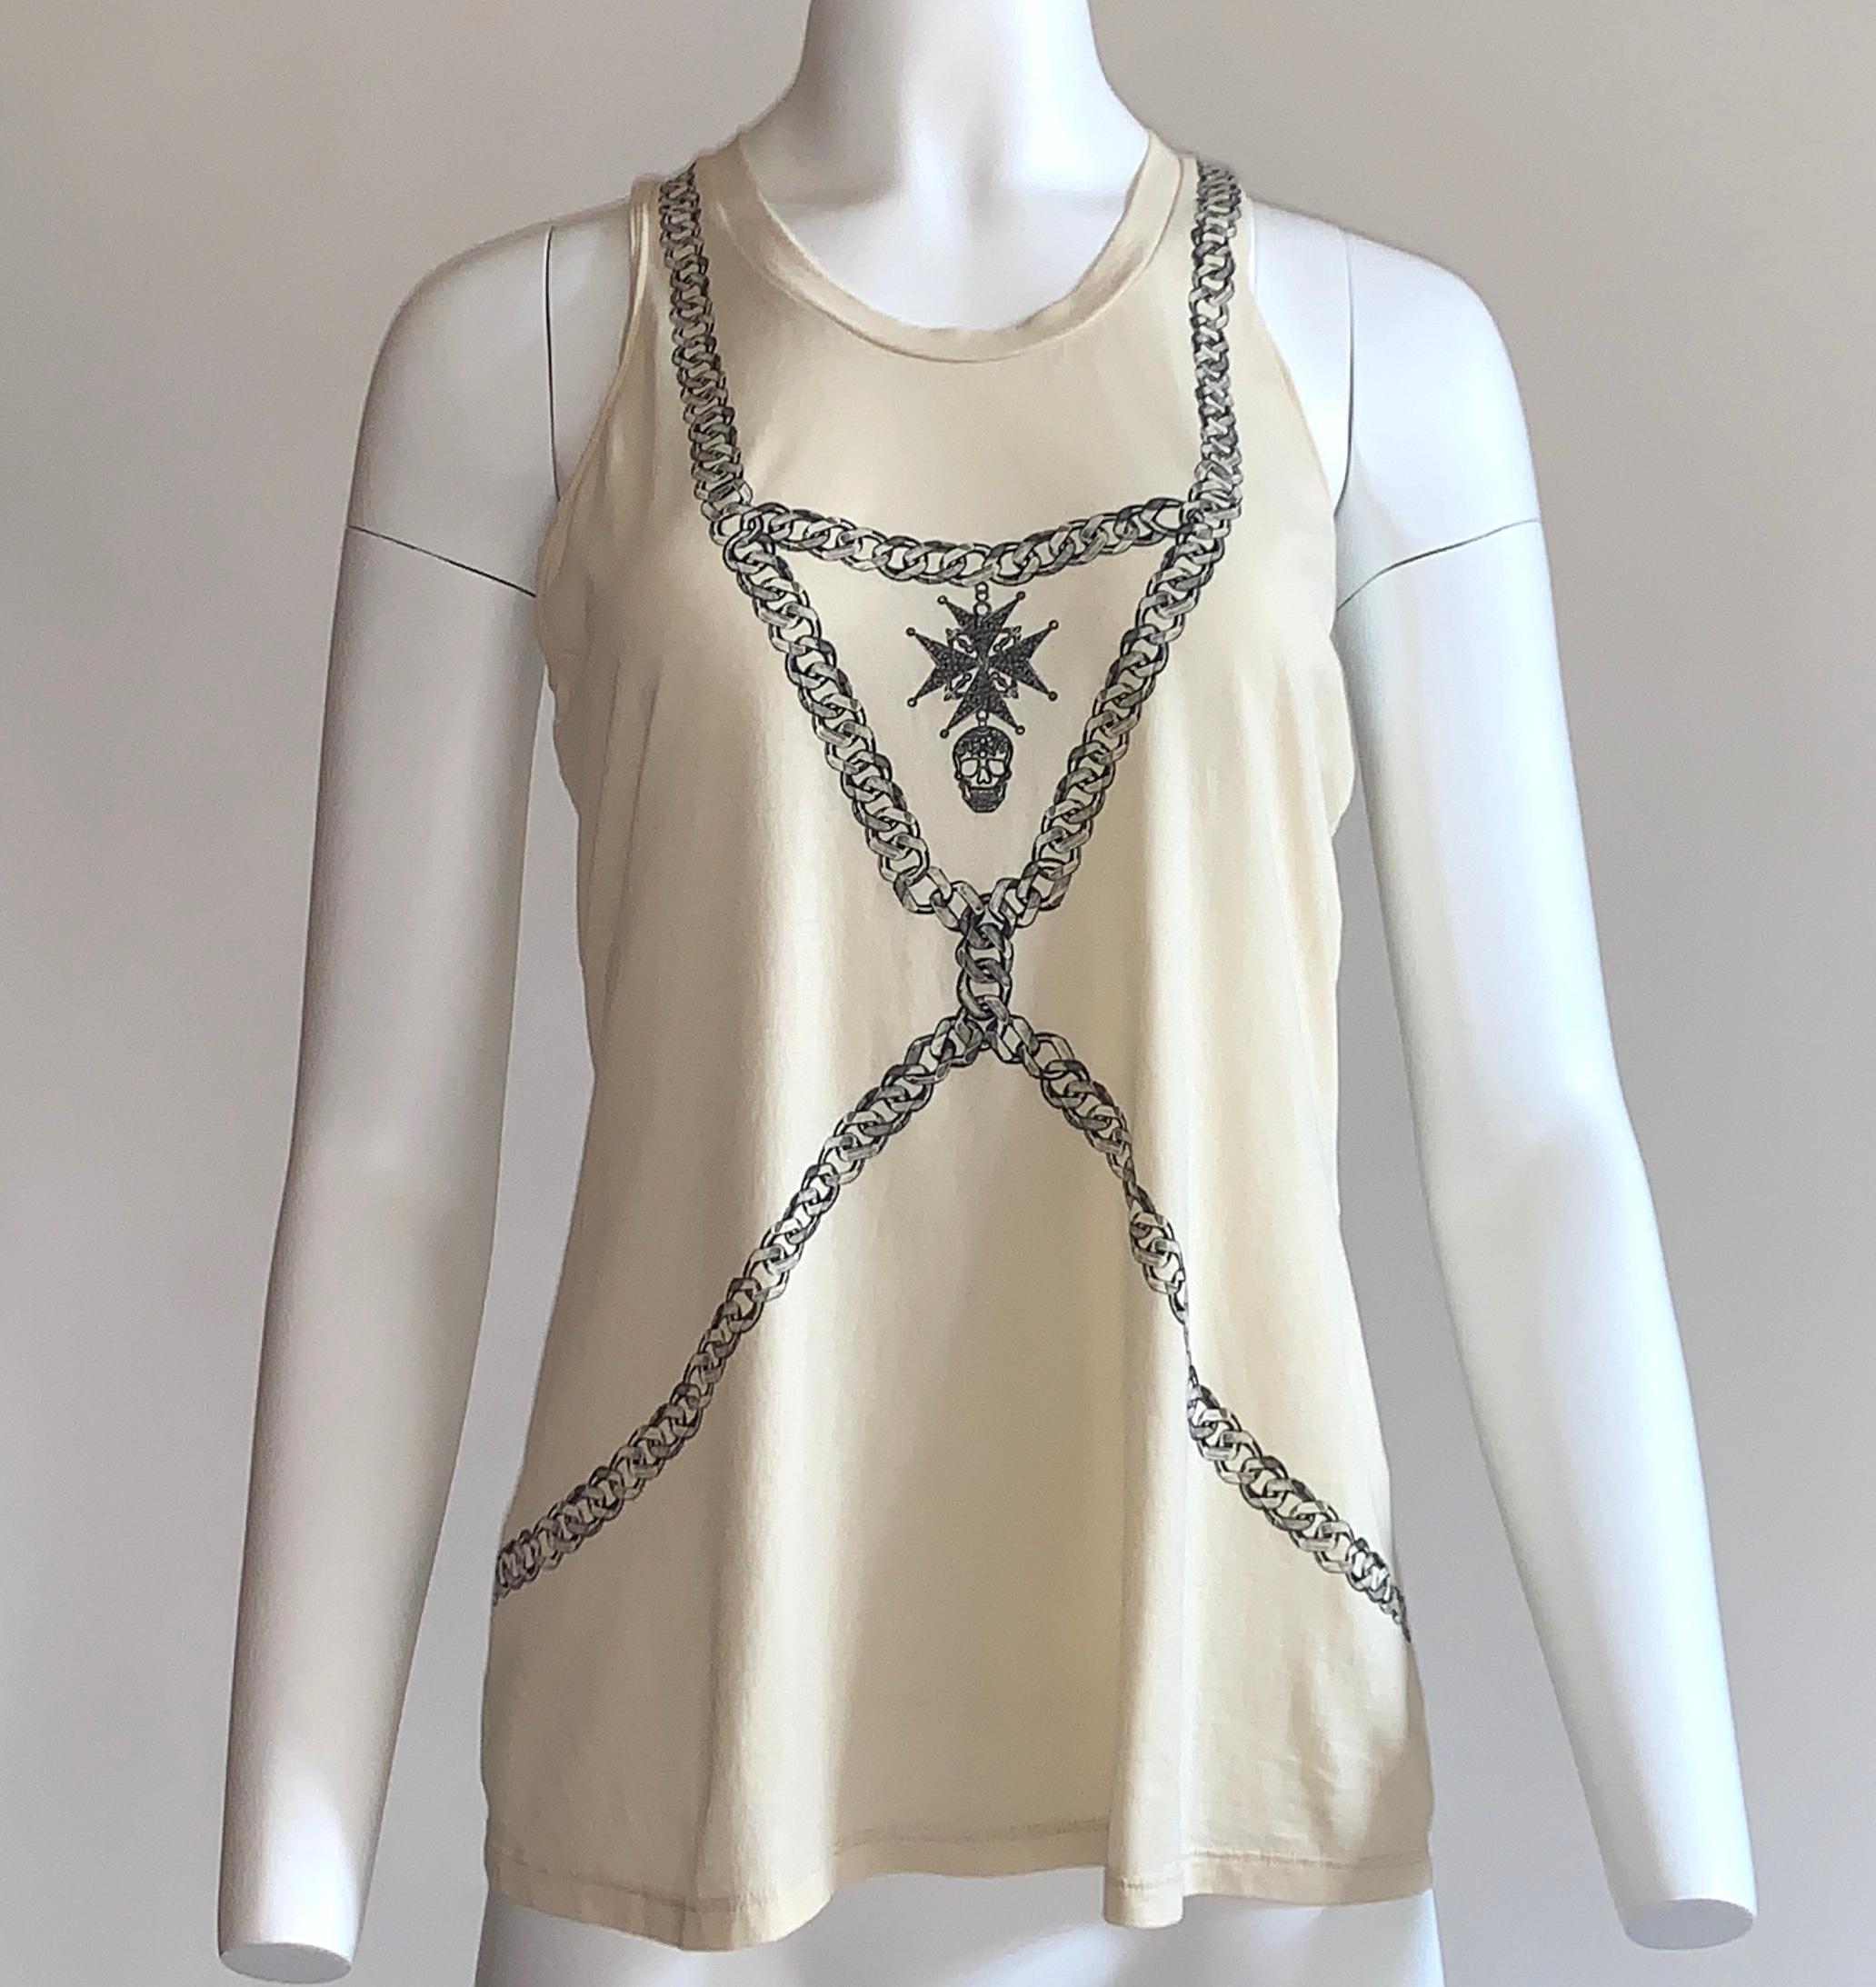 Alexander Mcqueen 2015 cream t-shirt tank featuring chain harness print, with printed Maltese cross and skull at front. Cool twist detailing at racerback. 

100% cotton.

Made in Italy.

Size IT 40, approximate US 4. See measurements.
Bust (underarm